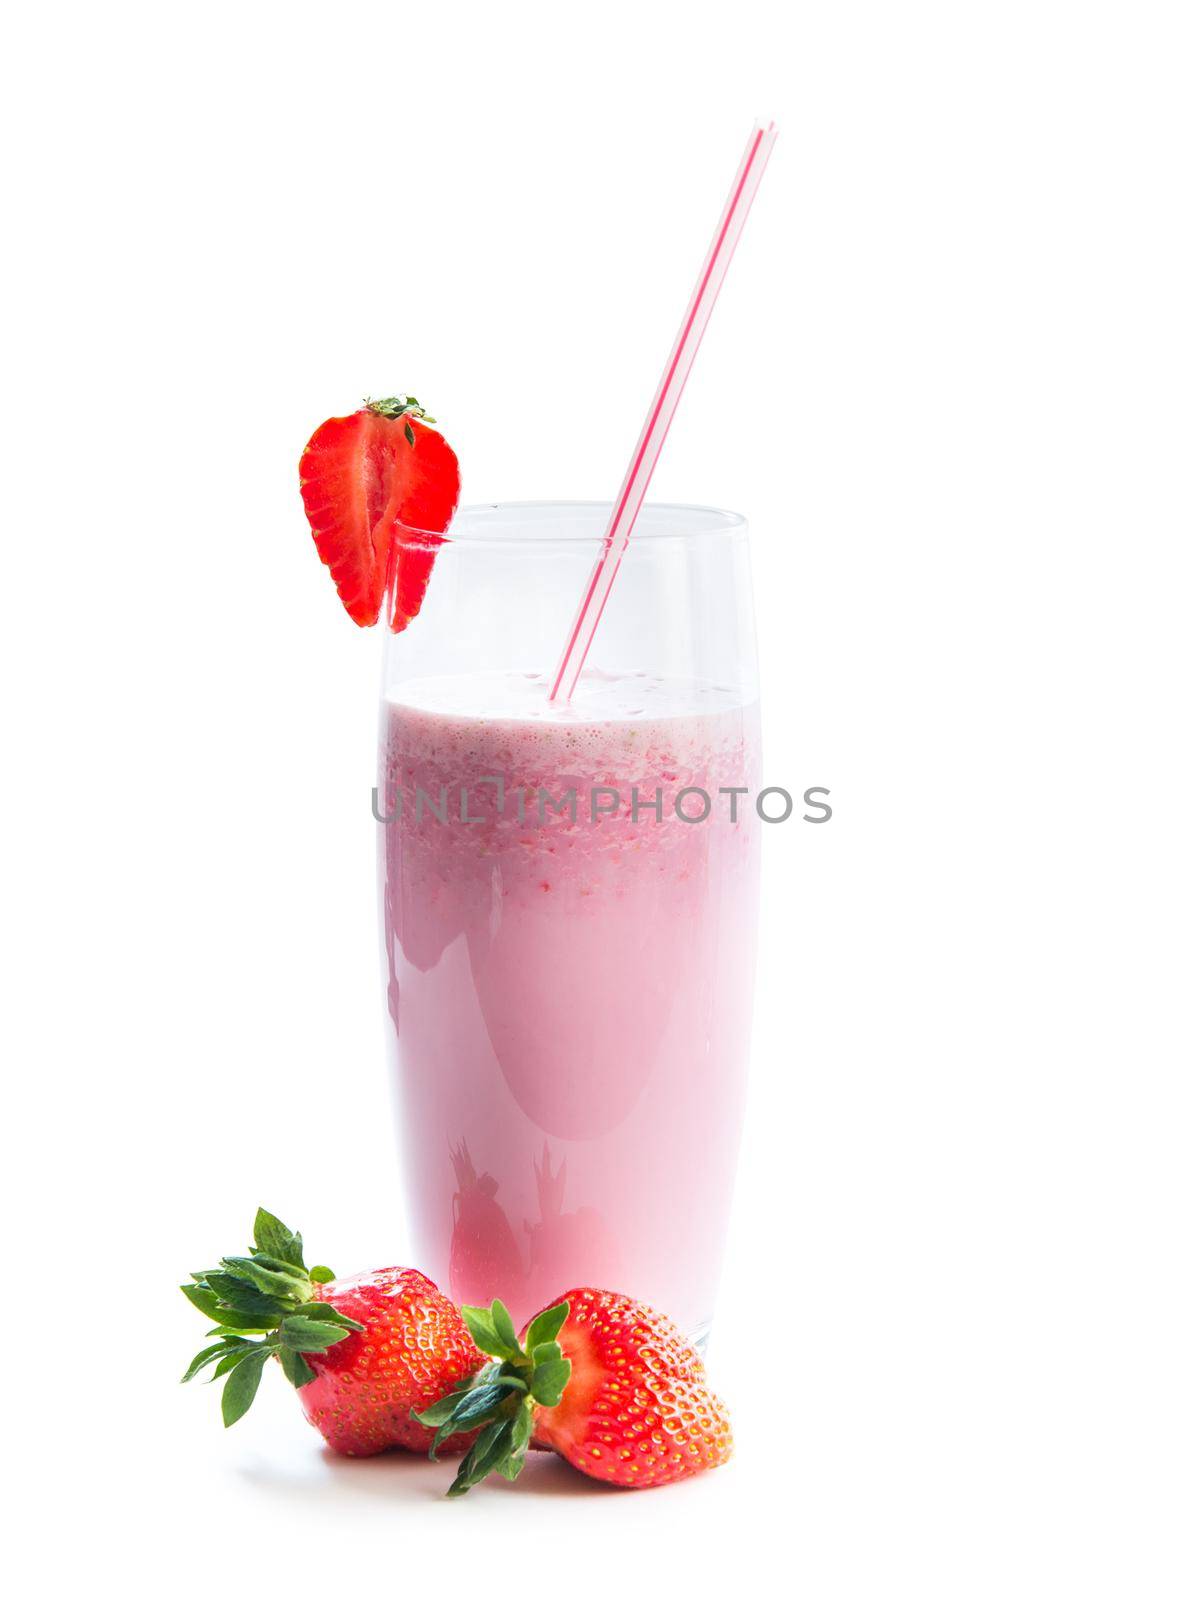 Fresh fruits and smoothies by tan4ikk1